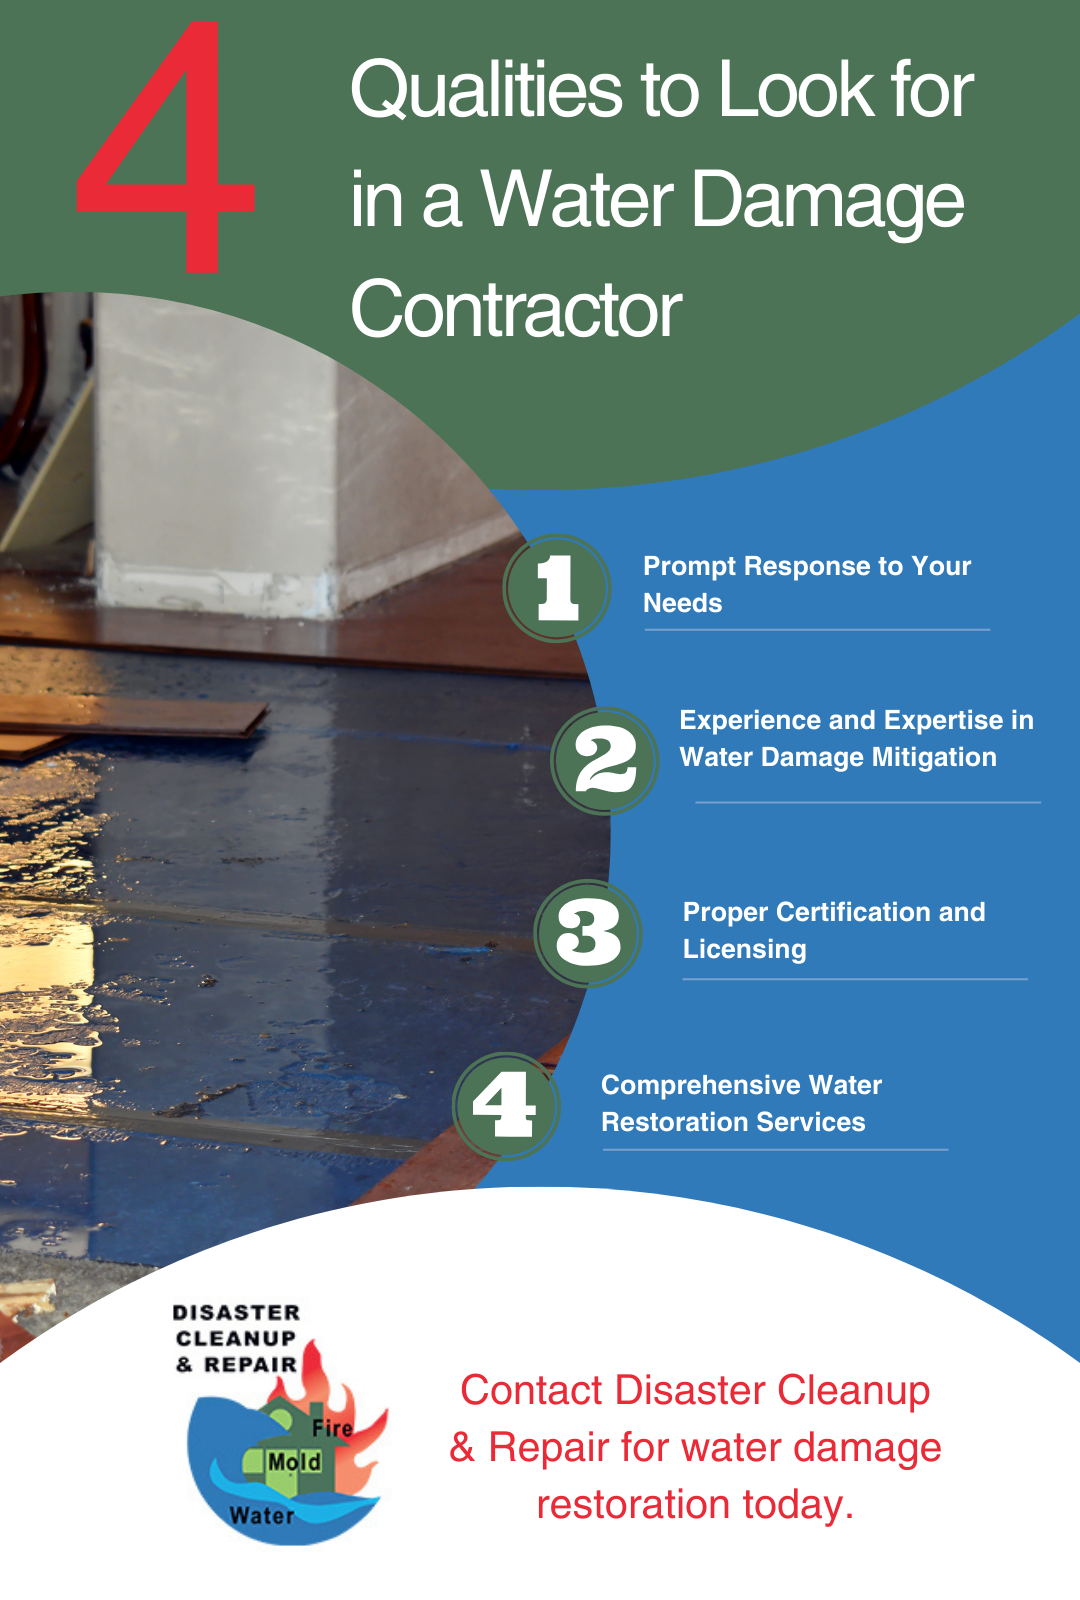 4 Qualities to Look for in a Water Damage Contractor infographic